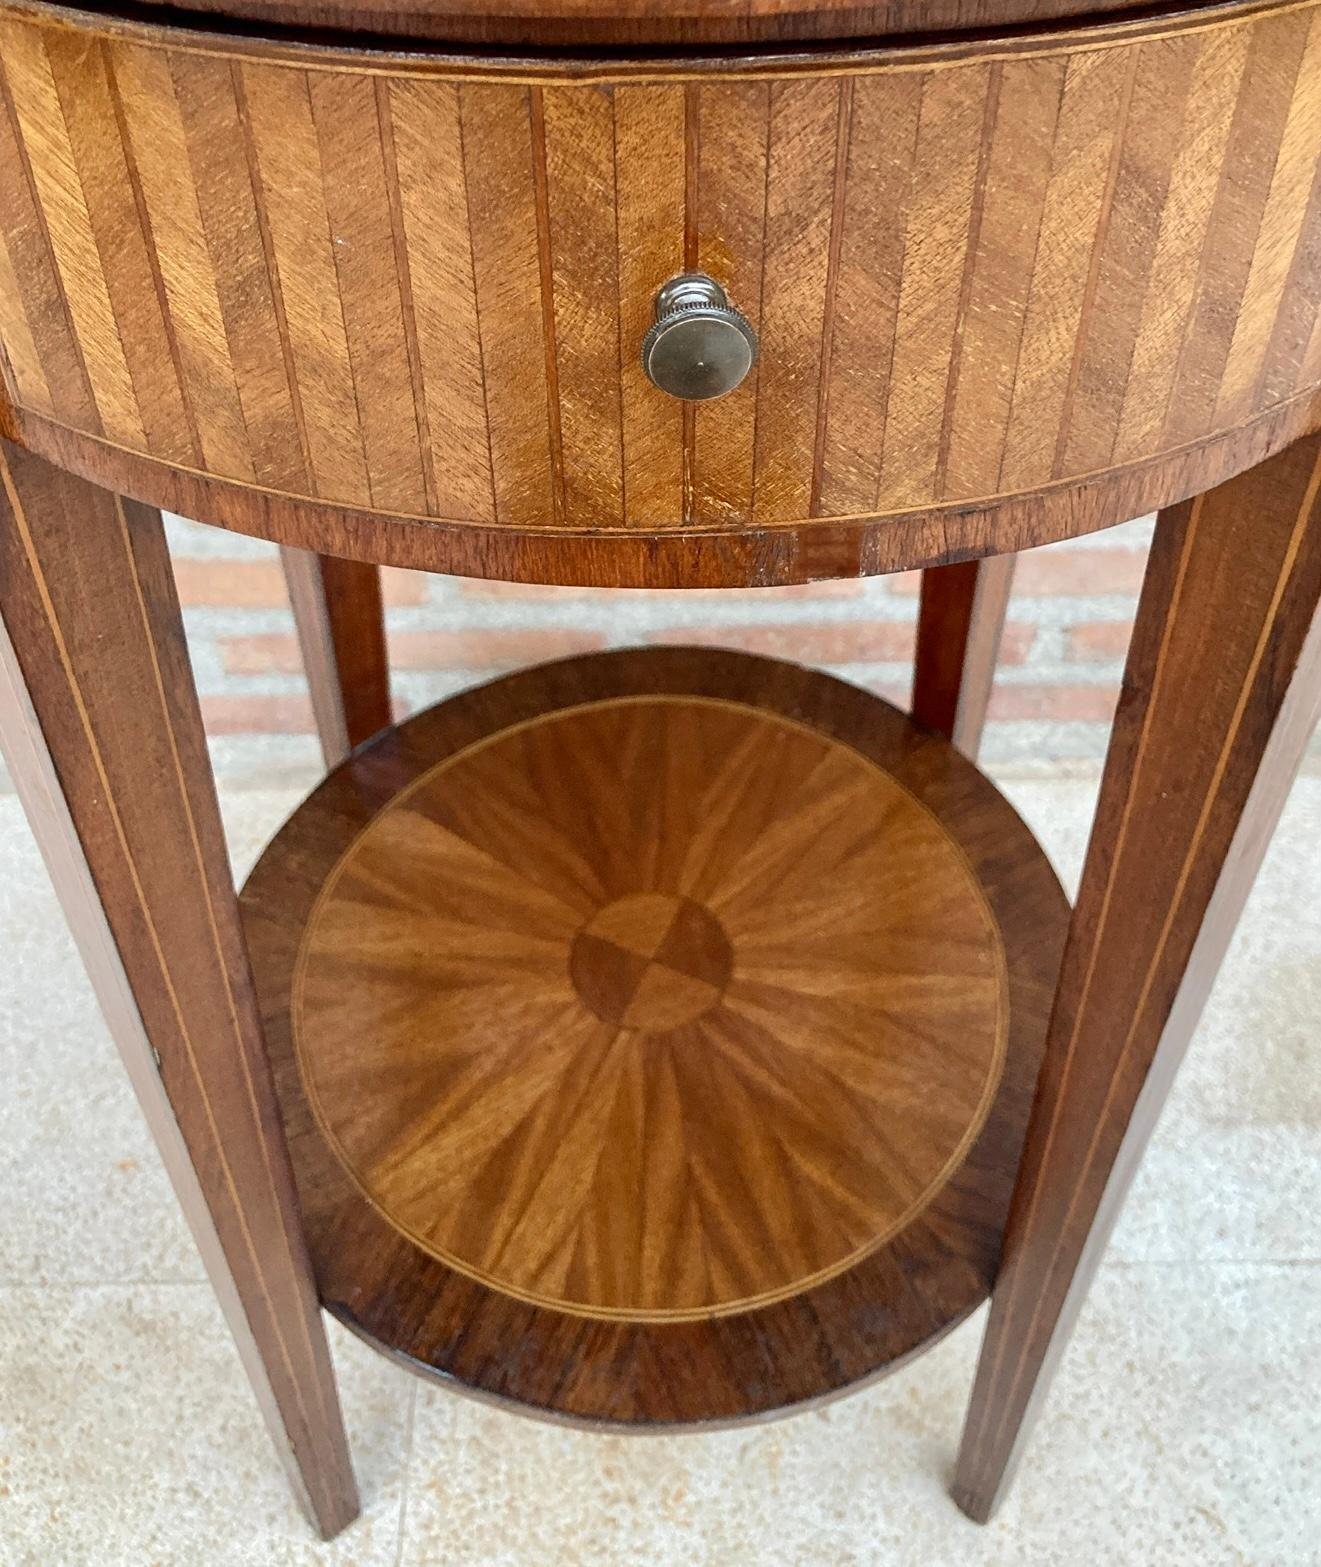 20th Century French Round Side Table in Walnut and Marquetry 1940s For Sale